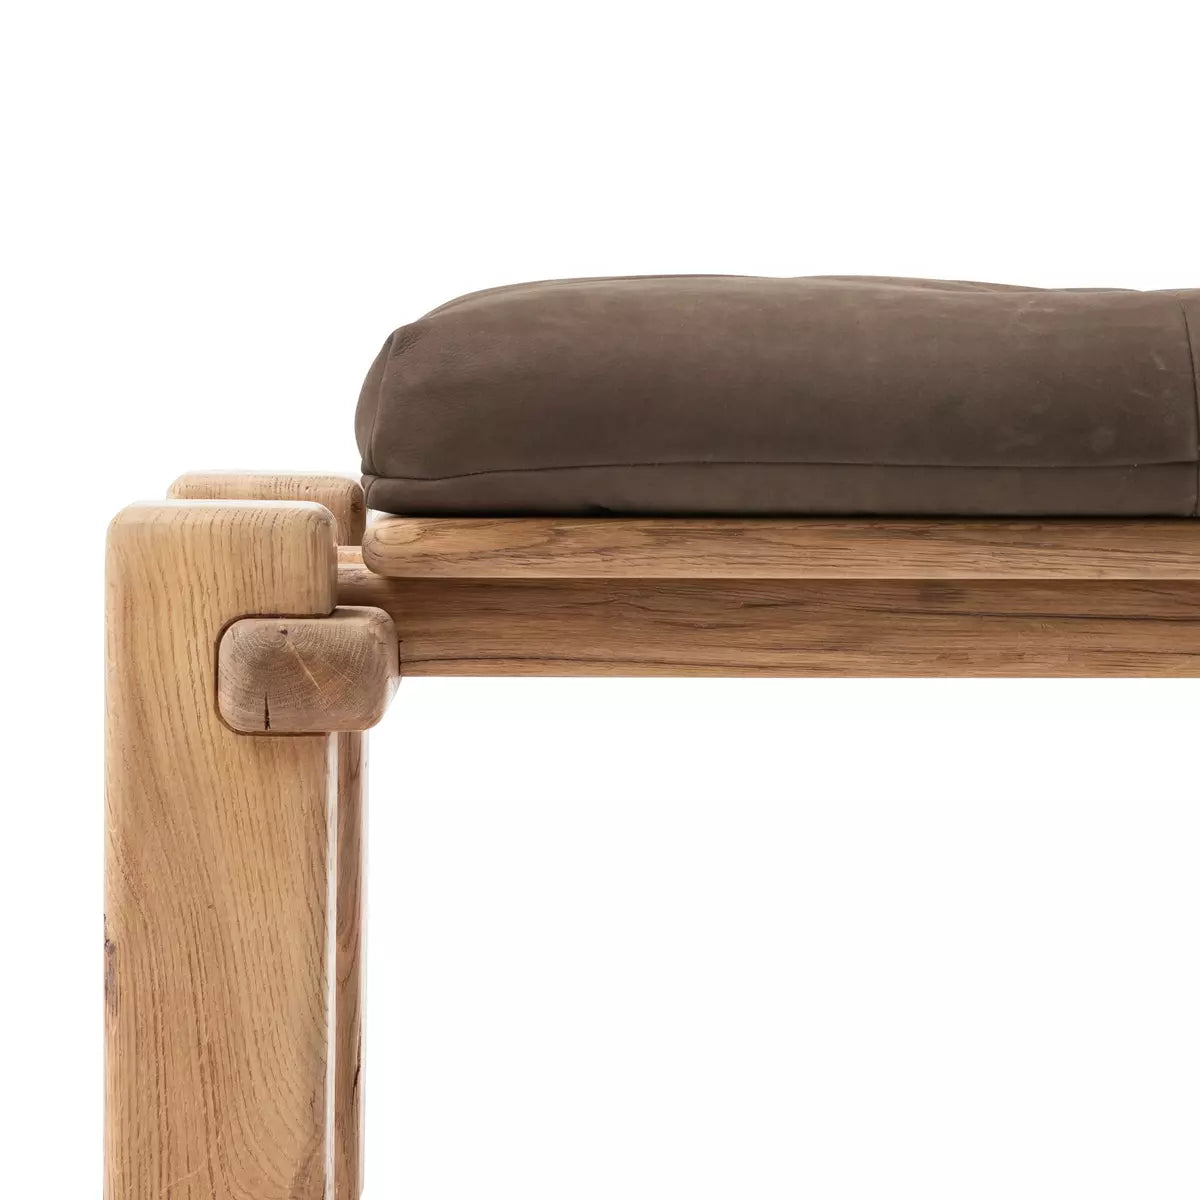 Marcia Accent Bench